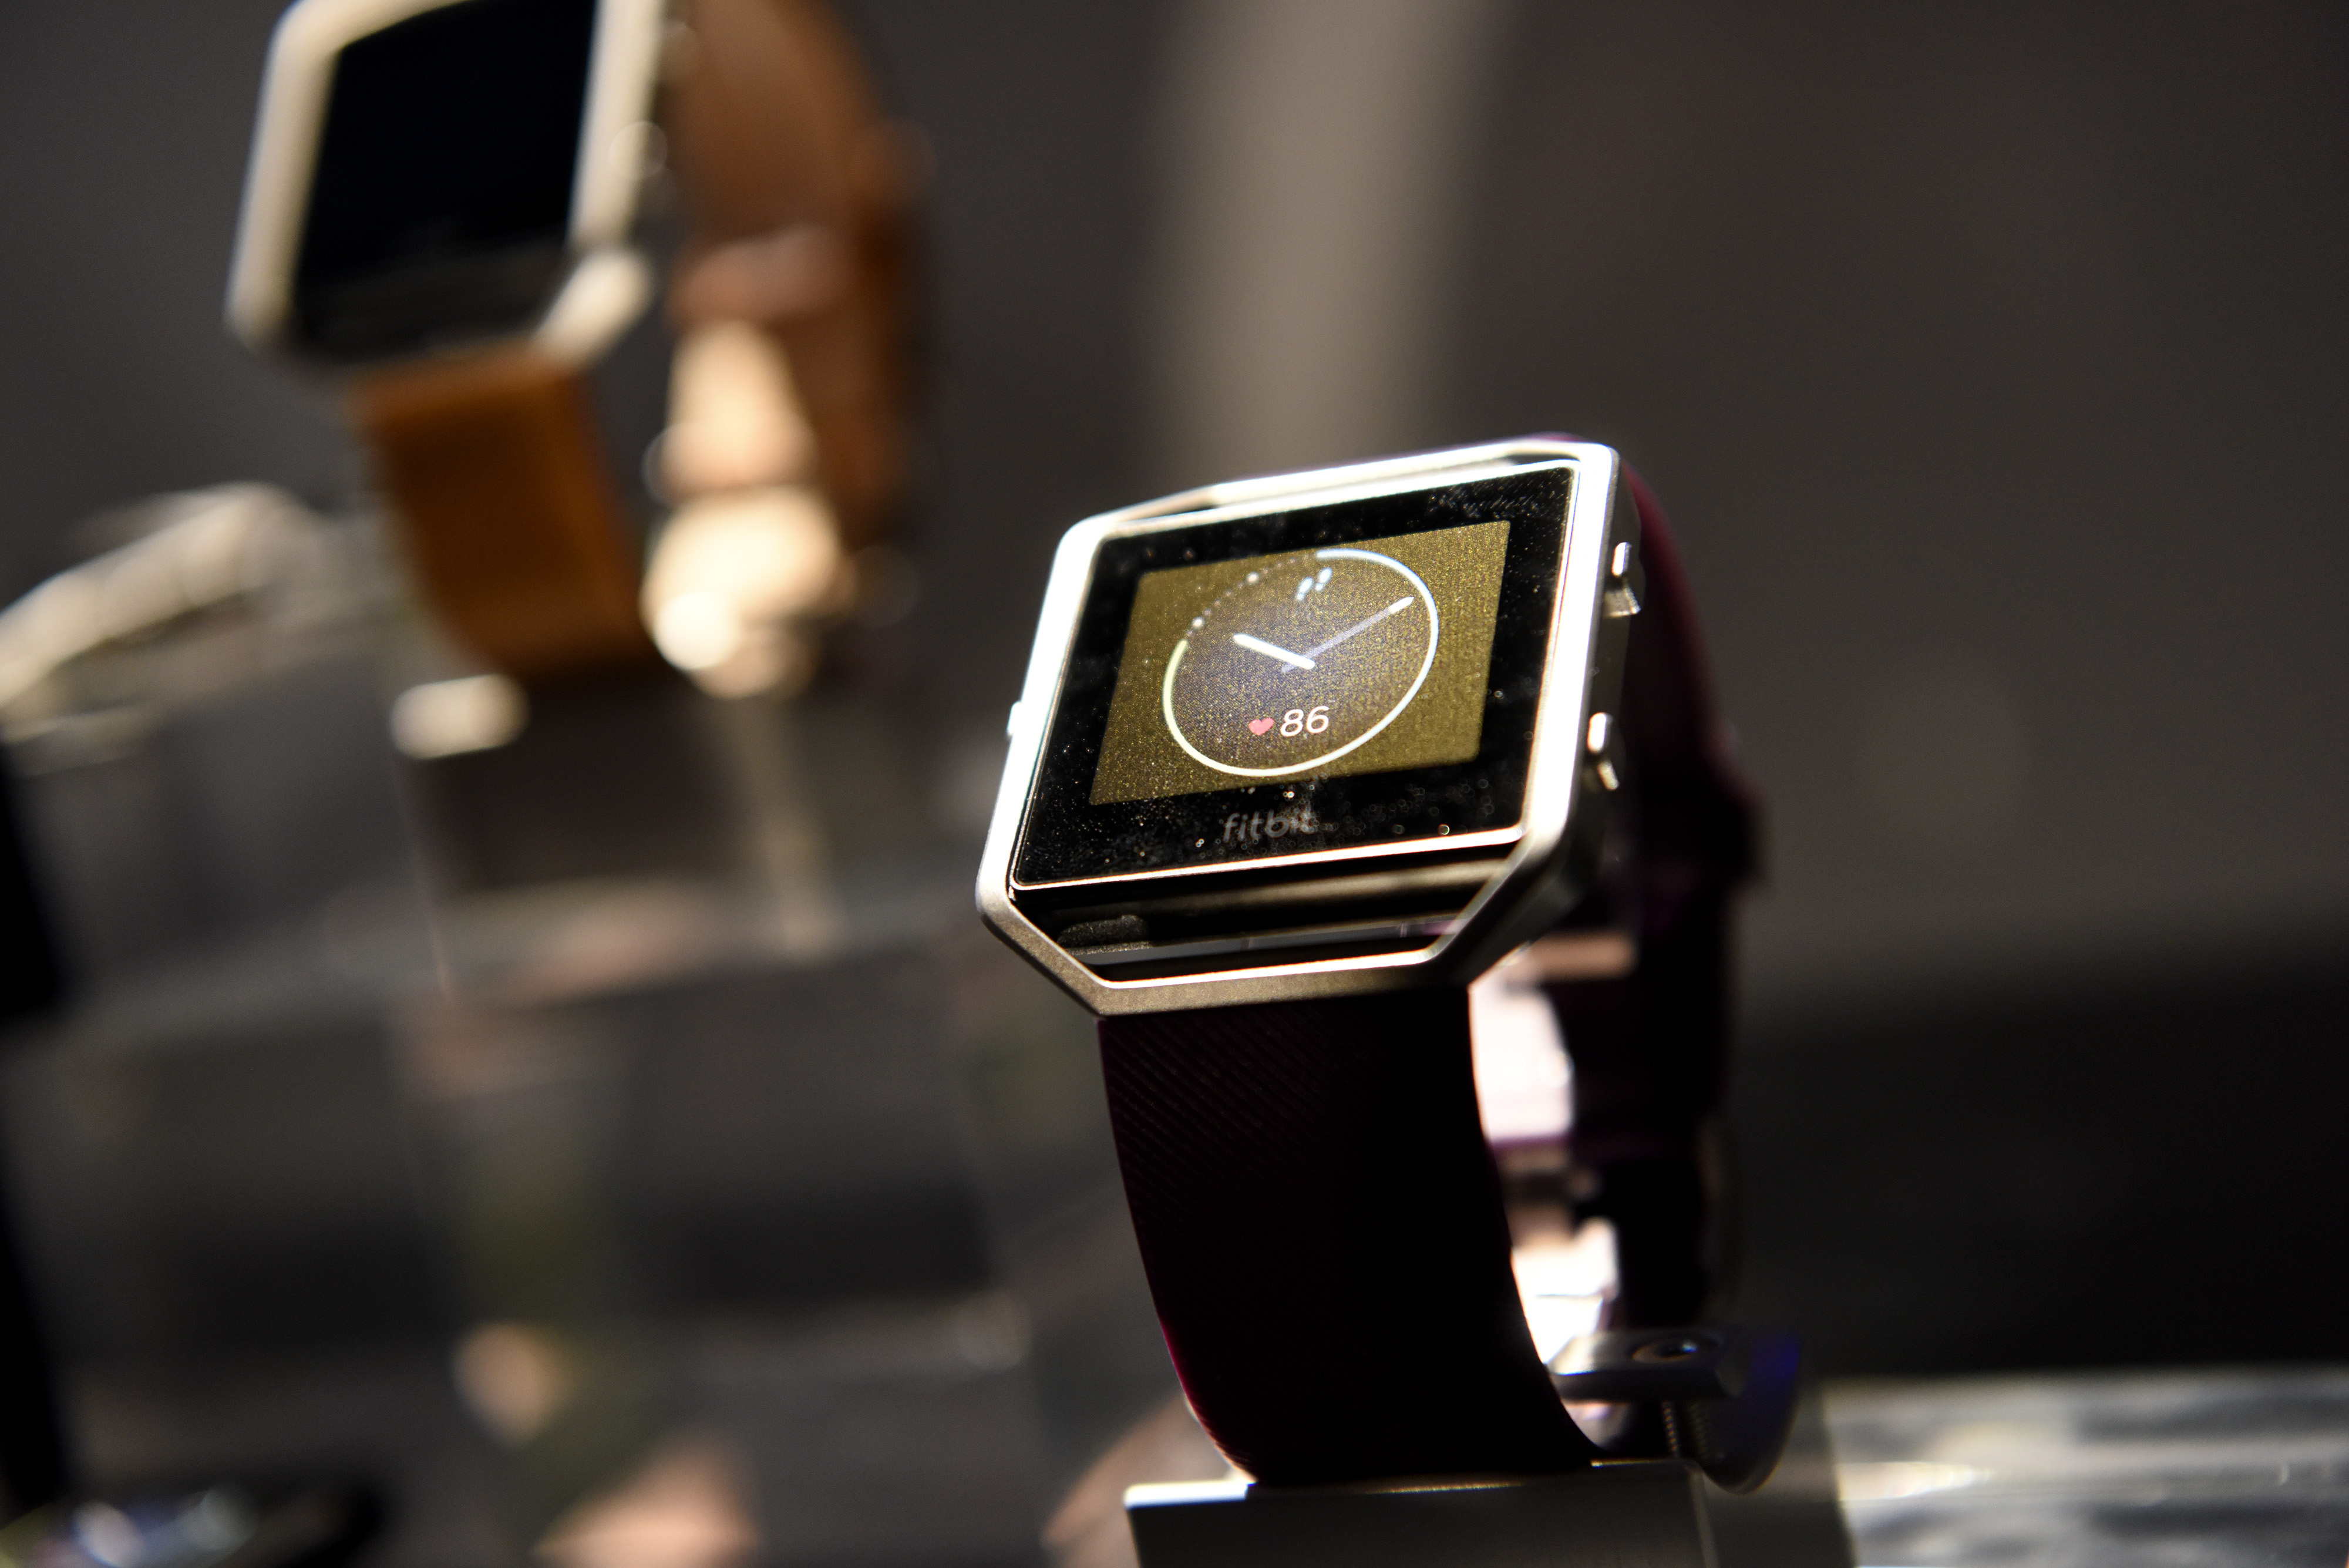 The Fitbit Inc. Blaze fitness tracker is displayed during an event at the 2016 Consumer Electronics Show (CES) in Las Vegas on Jan. 5, 2016. (David Paul Morris—Bloomberg/Getty Images)